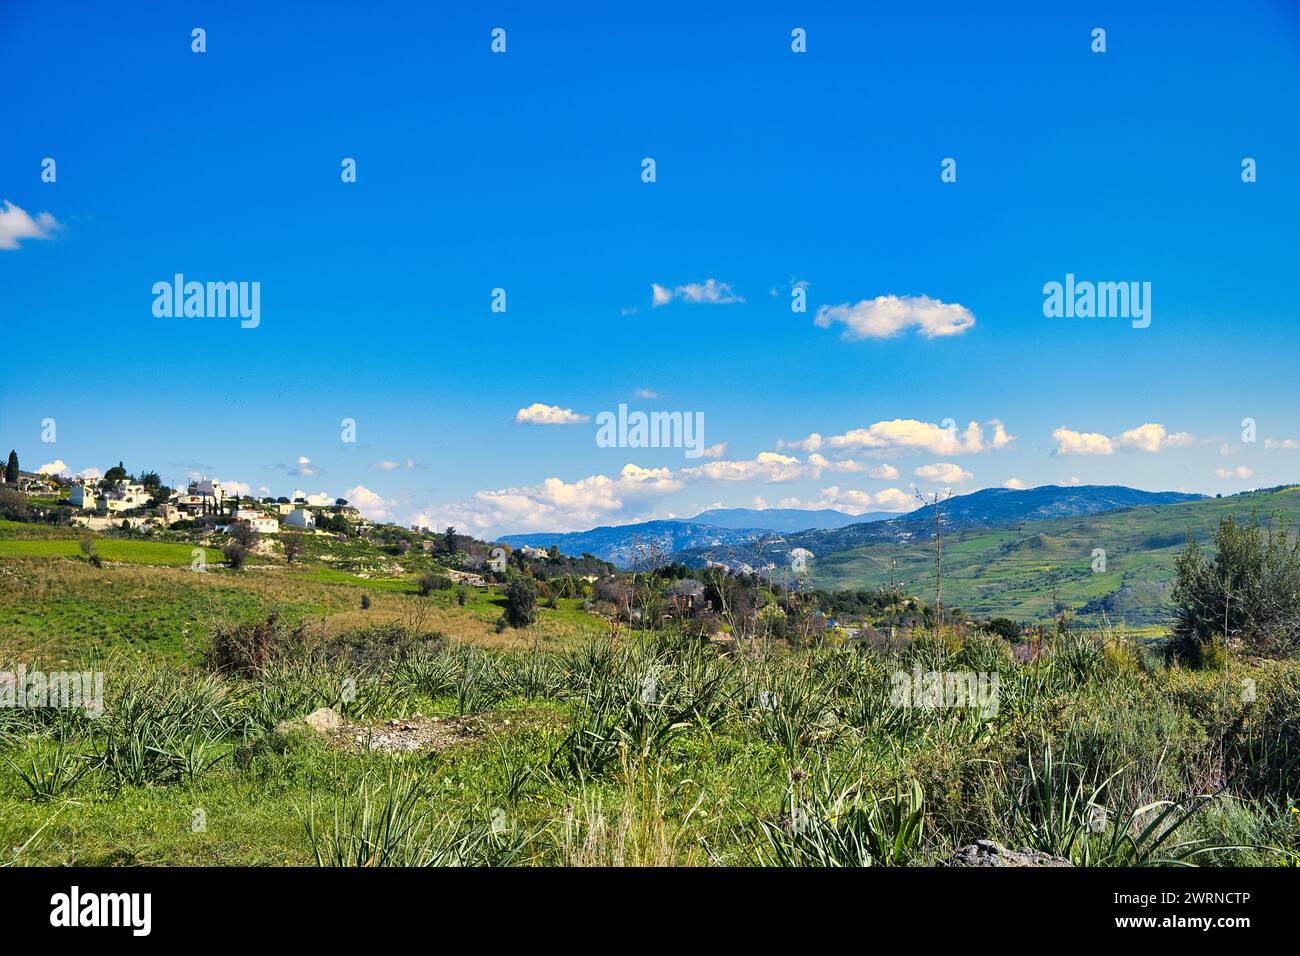 Landscape with green fields, mountains and a village near Nata, district of Paphos (Pafos), Cyprus, on a sunny day Stock Photo